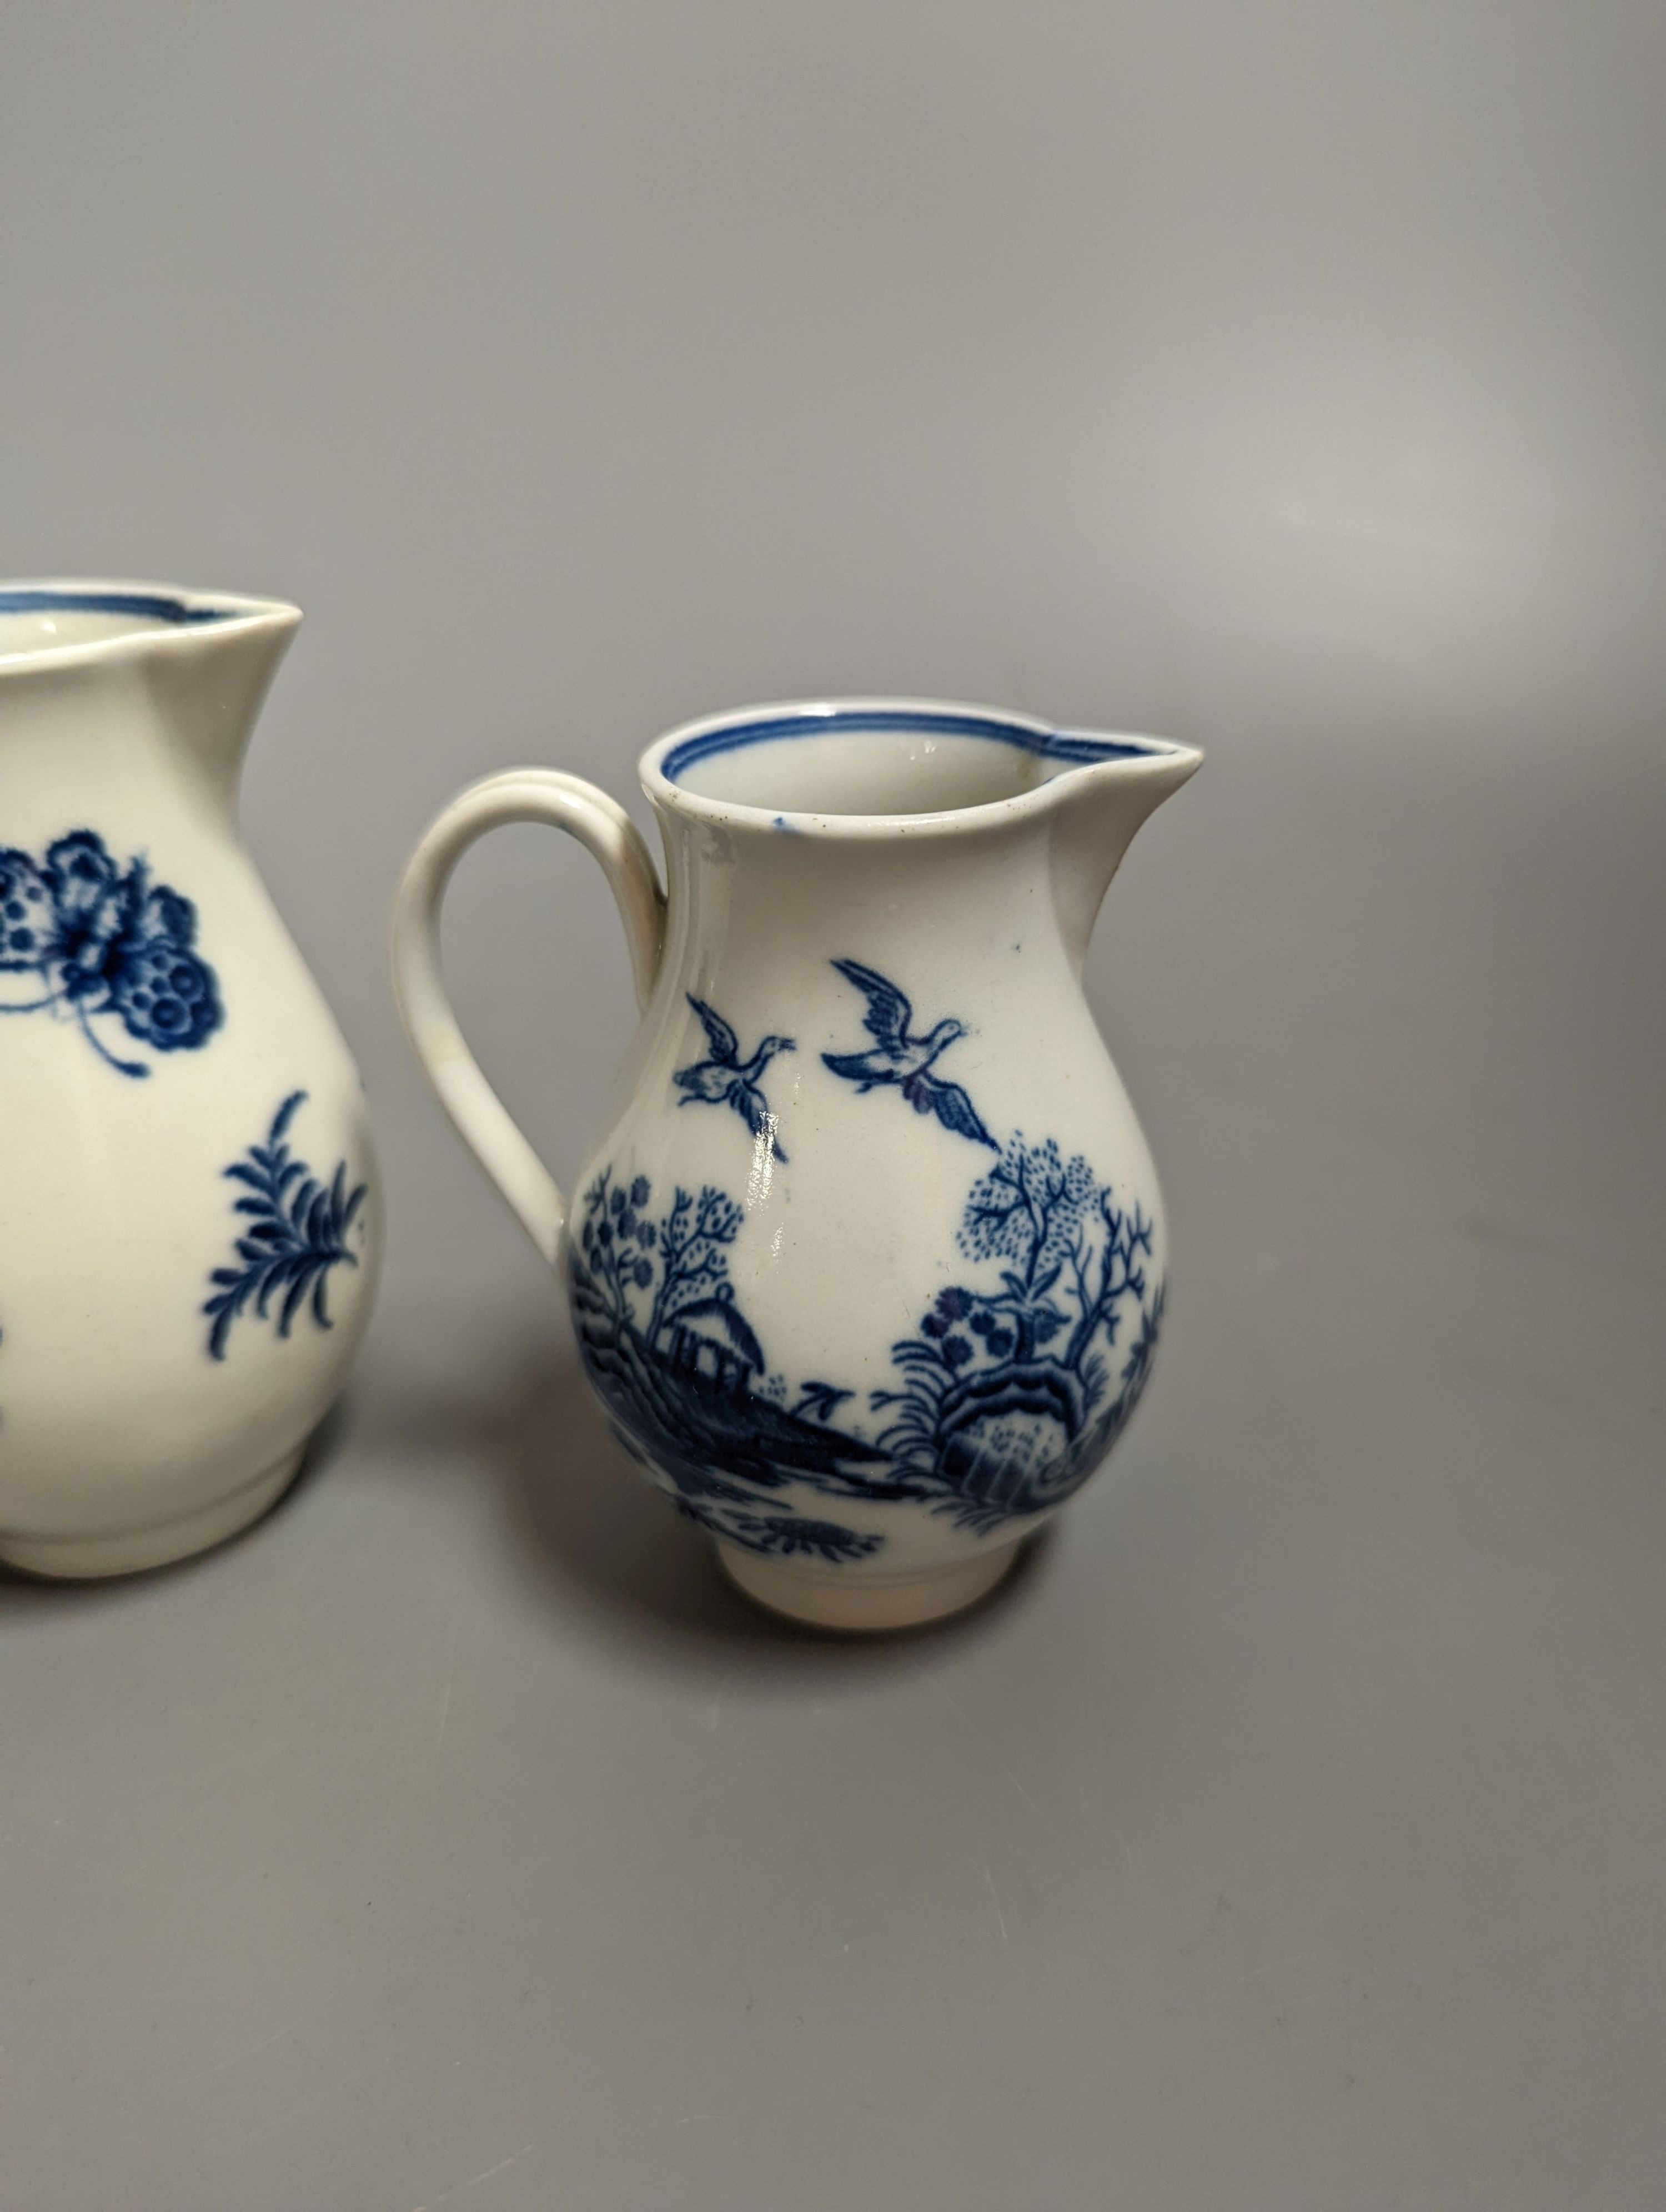 A Caughley sparrowbeak jug printed with the Three Flowers pattern and another printed with the Fence pattern, S marks